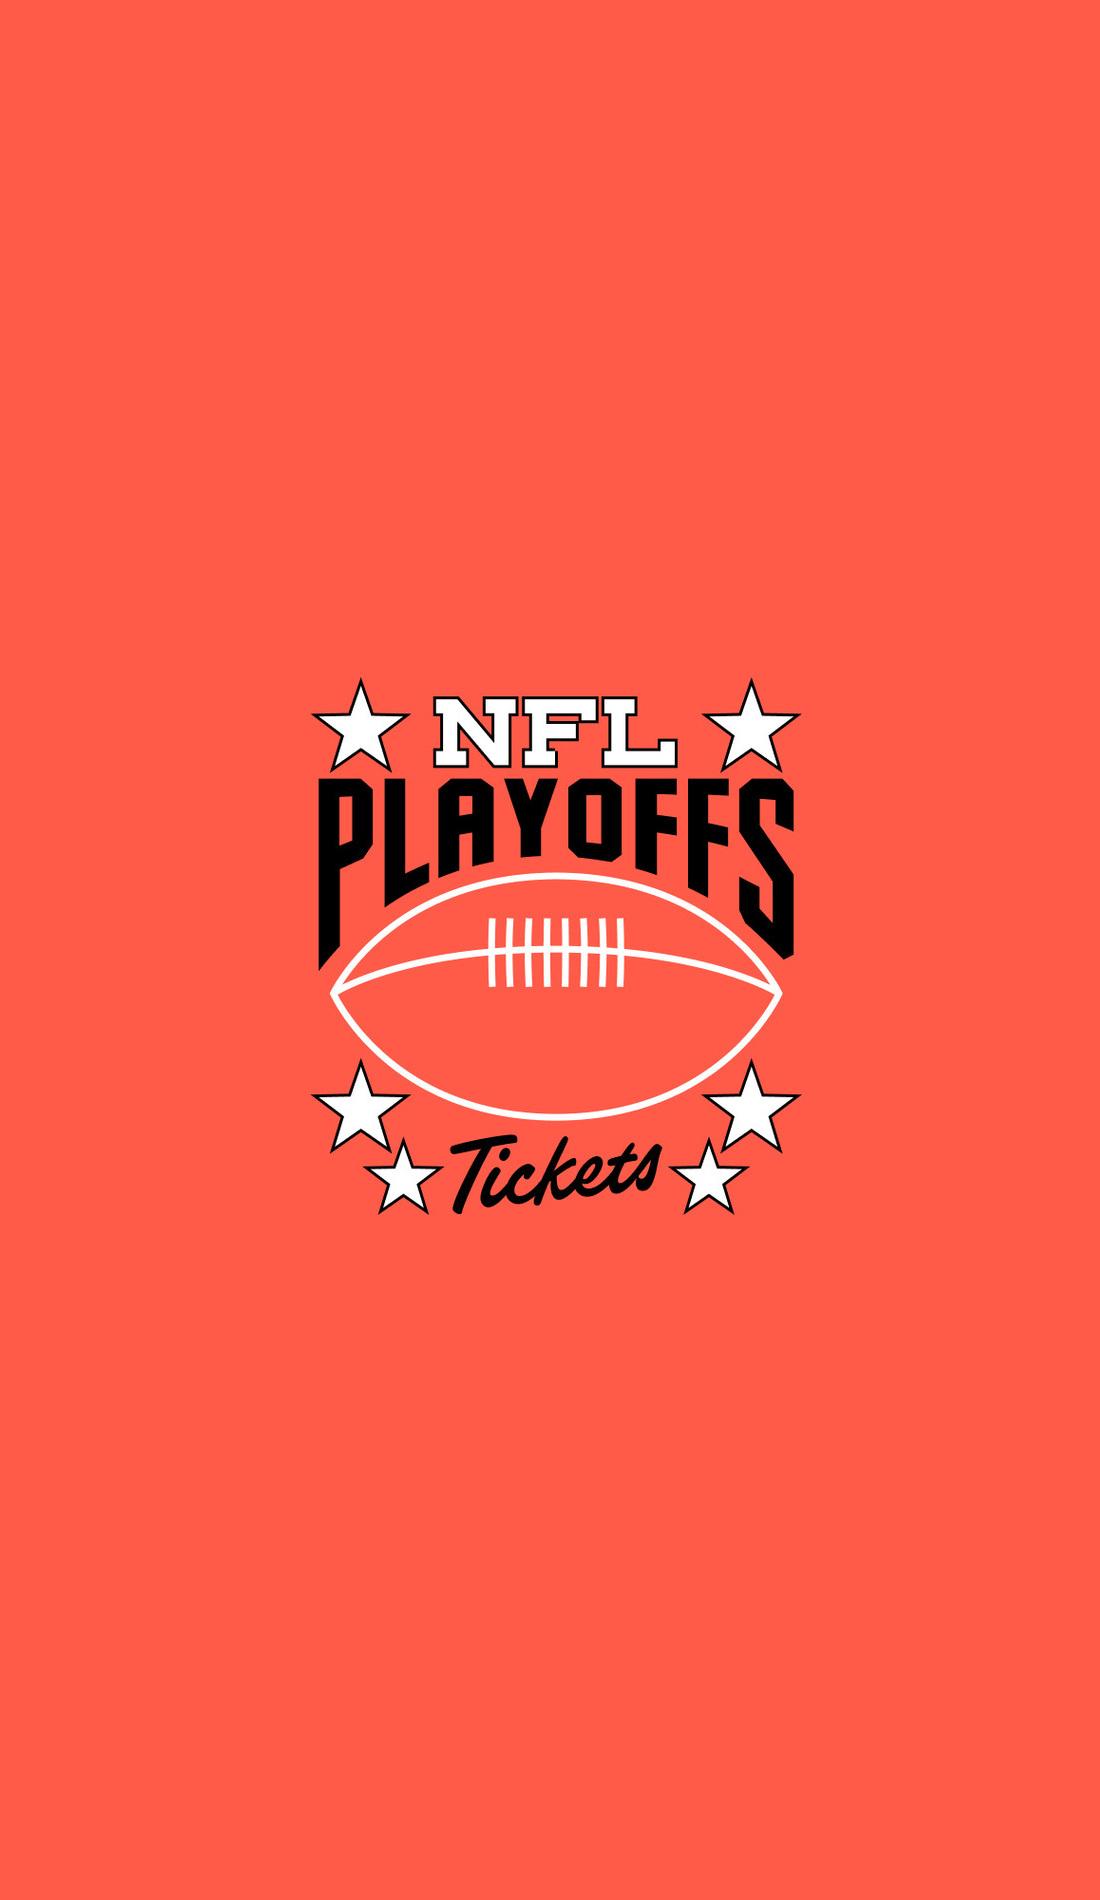 bengal playoff tickets 2022